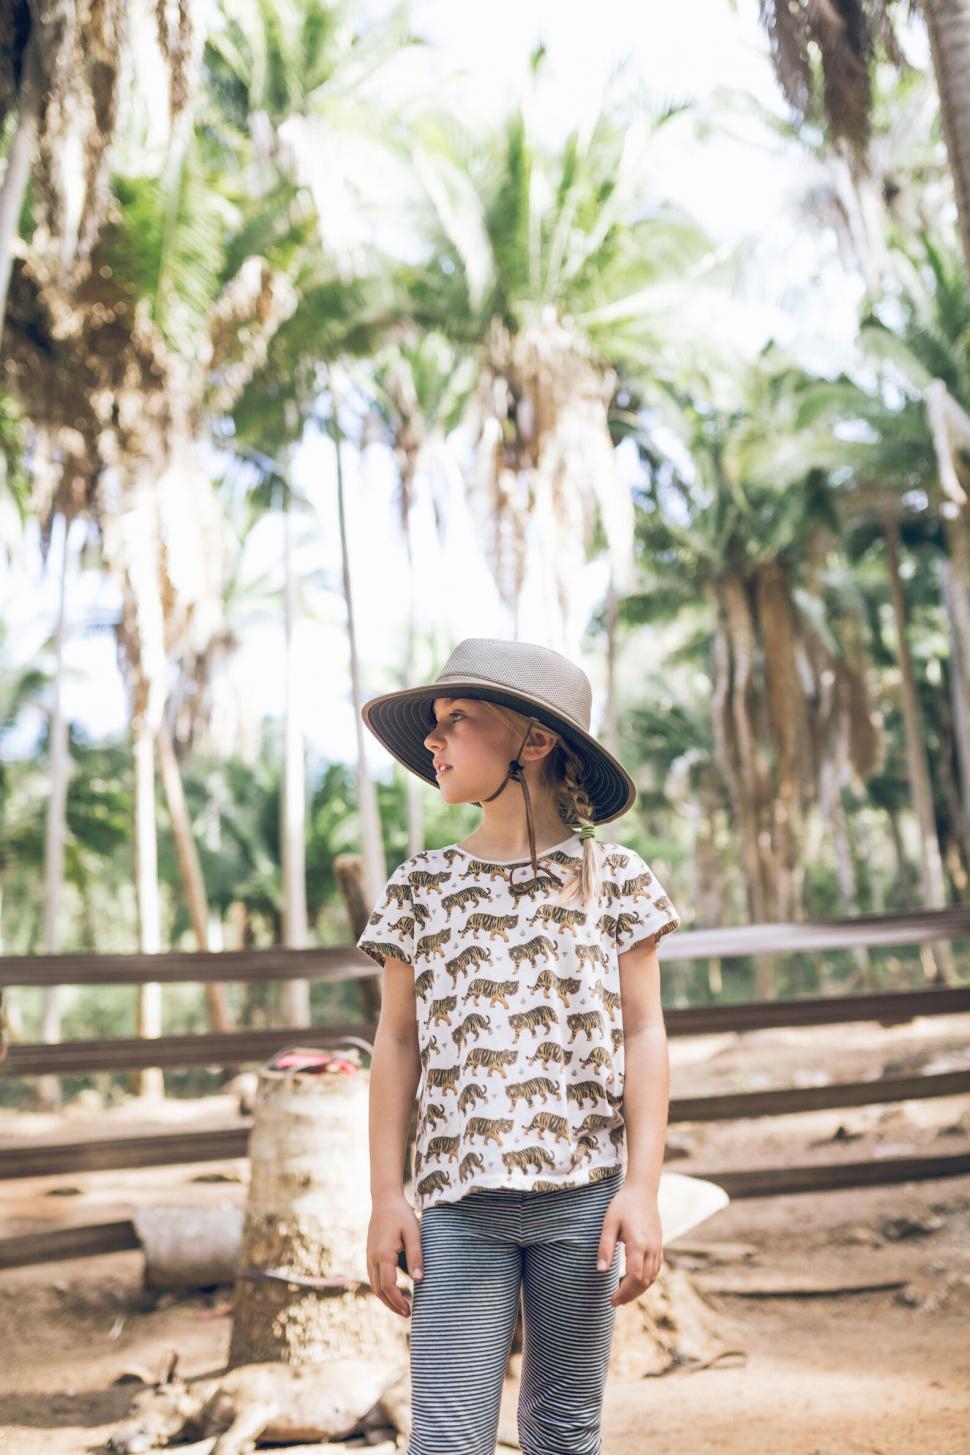 Free Image of Girl with hat standing among palm trees 